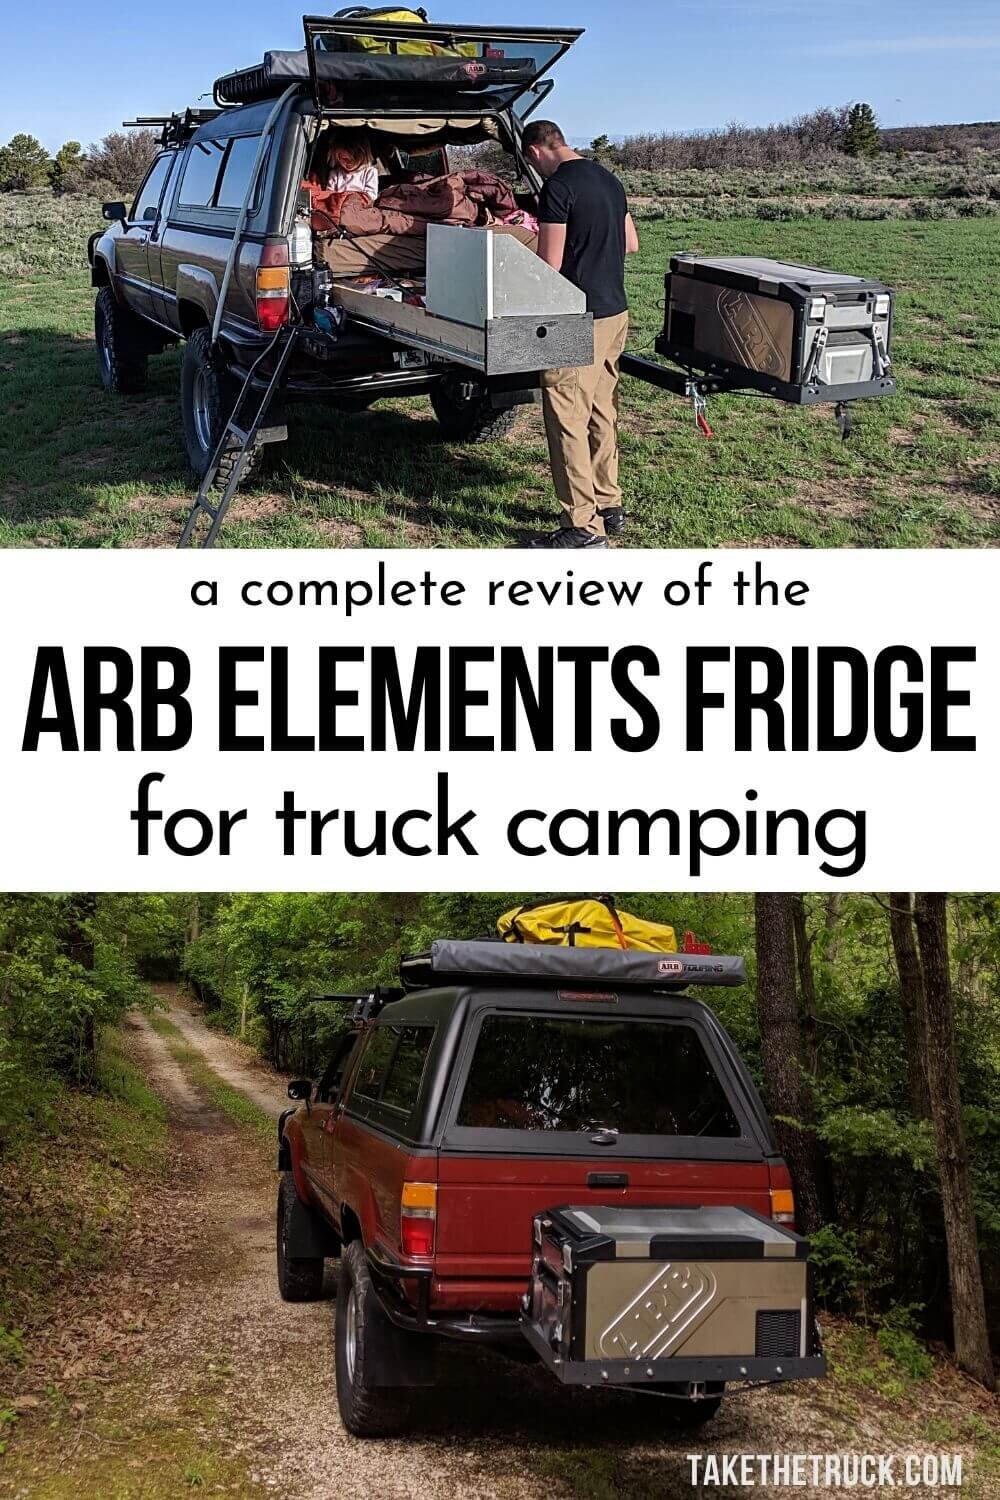 The ARB Elements Fridge is the best overland fridge and a great outdoor fridge for camping - read why the ARB Elements Fridge is a quality piece of gear for camping and overlanding.